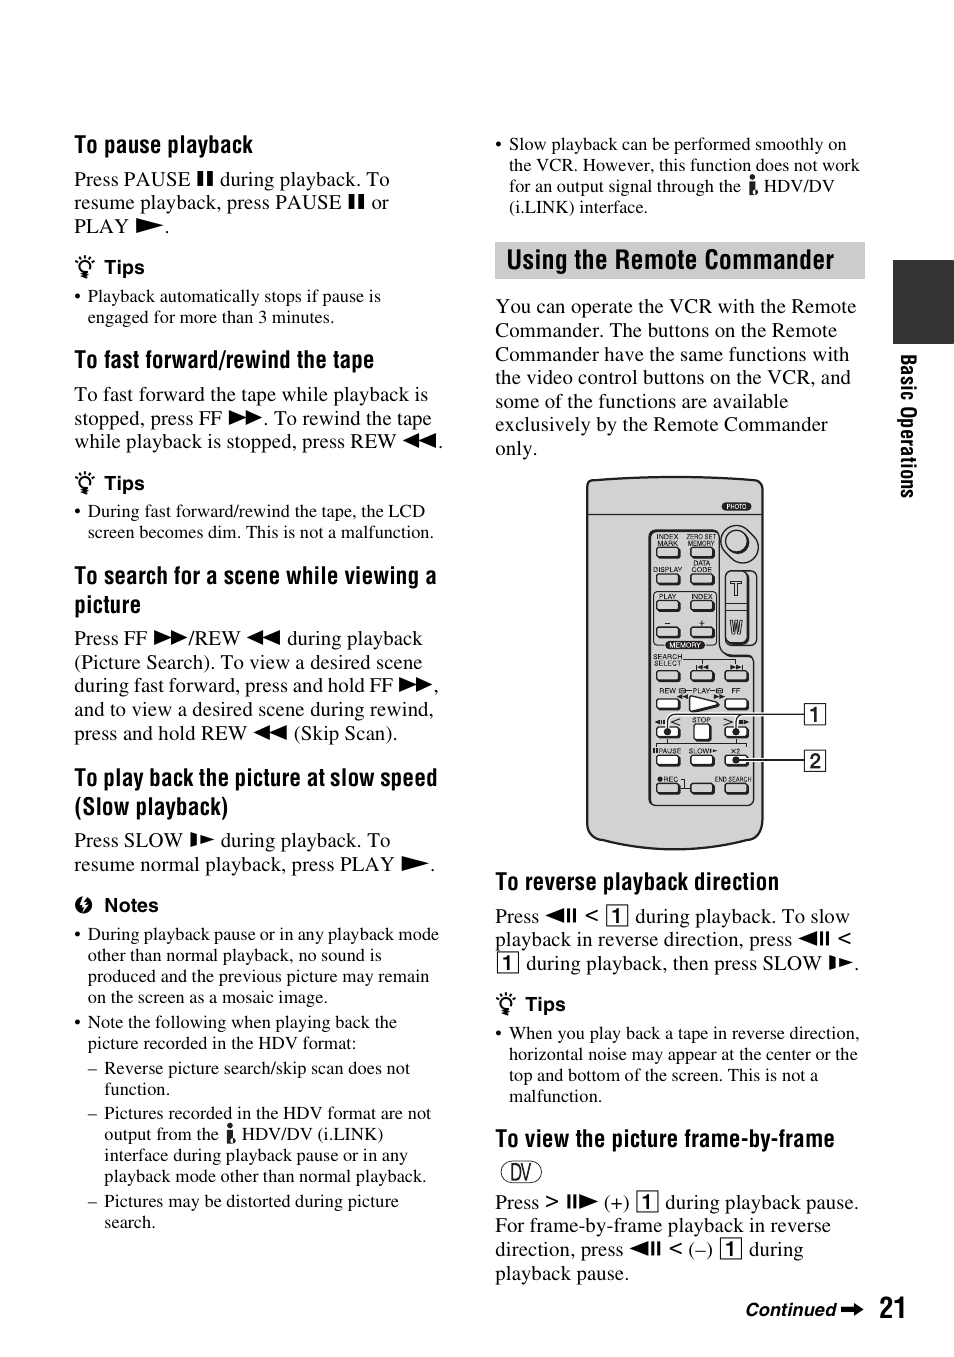 Using the remote commander | Sony GV-HD700 User Manual | Page 21 / 108